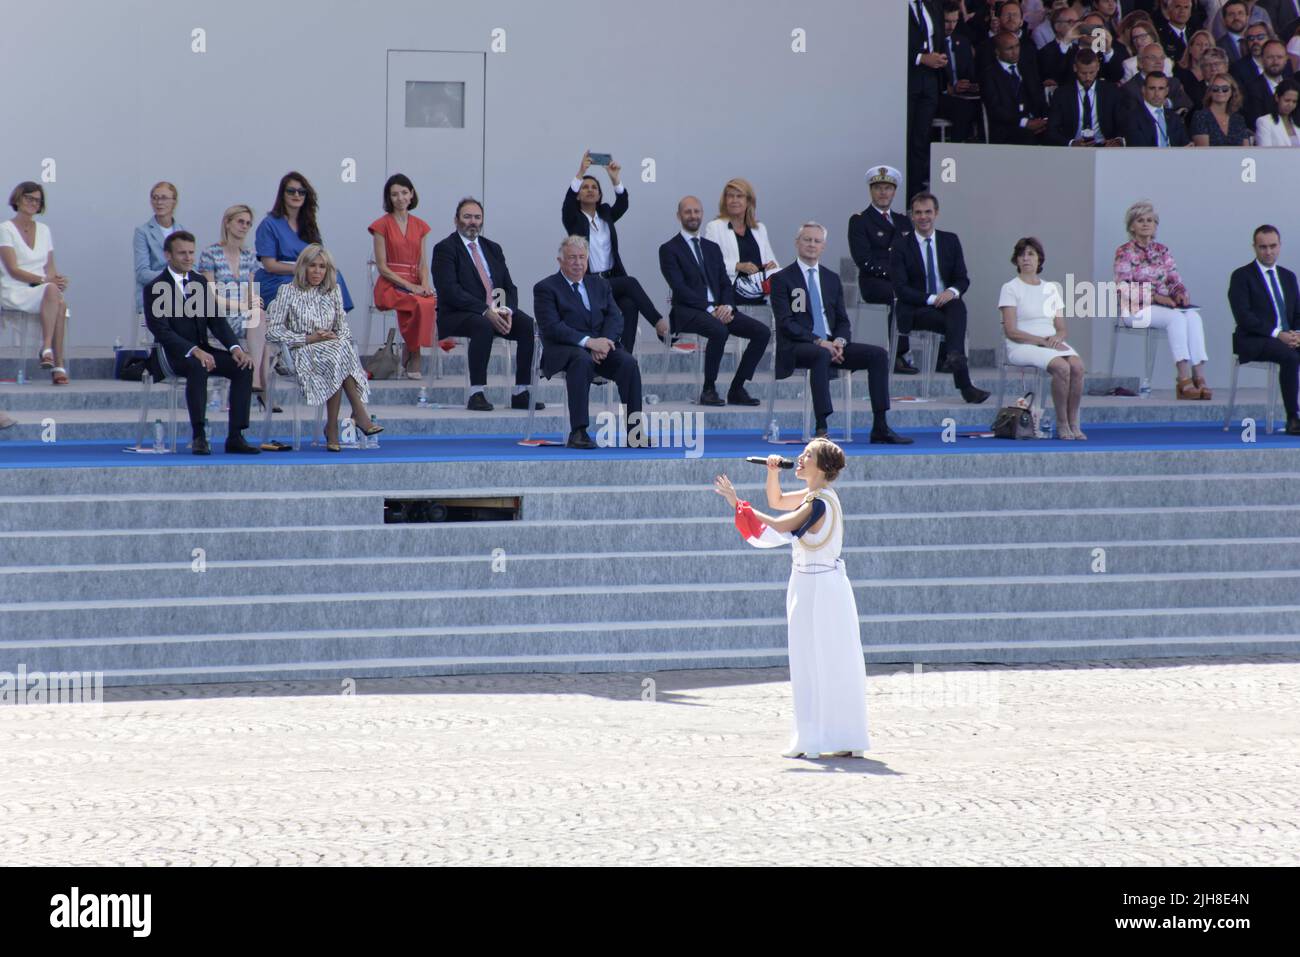 Paris, France. 14th July, 2022. Candice Parise sings France in front of the presidential platform accompanied by musicians from the Paris Fire Brigade Stock Photo